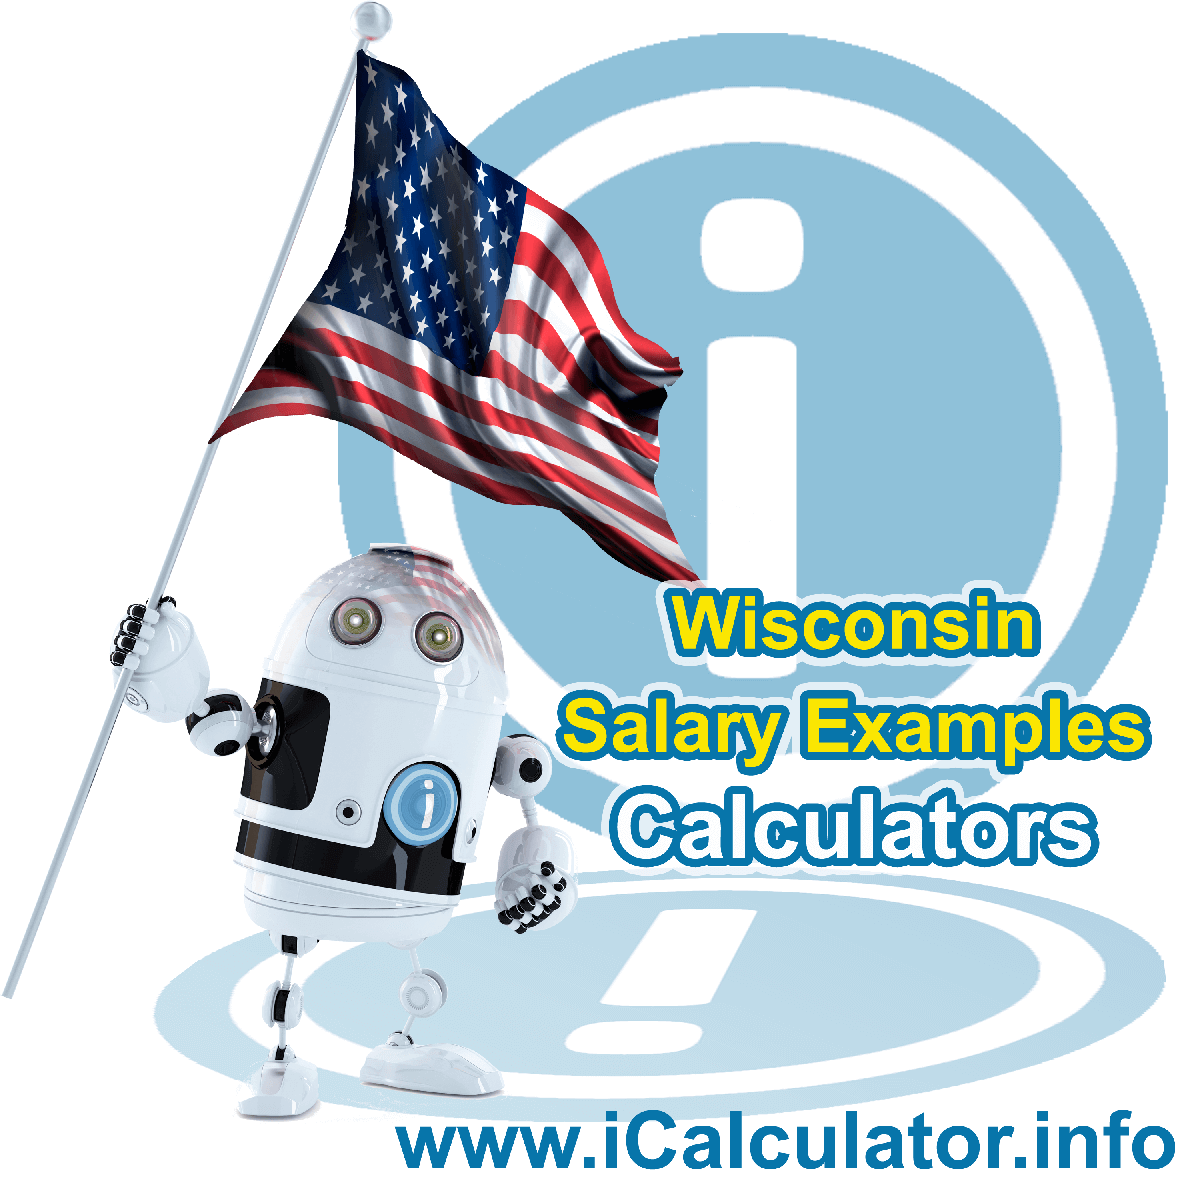 Wisconsin Salary Example for $ 40,000.00 in 2023 | iCalculator™ | $ 40,000.00 salary example for employee and employer paying Wisconsin State tincome taxes. Detailed salary after tax calculation including Wisconsin State Tax, Federal State Tax, Medicare Deductions, Social Security, Capital Gains and other income tax and salary deductions complete with supporting Wisconsin state tax tables 